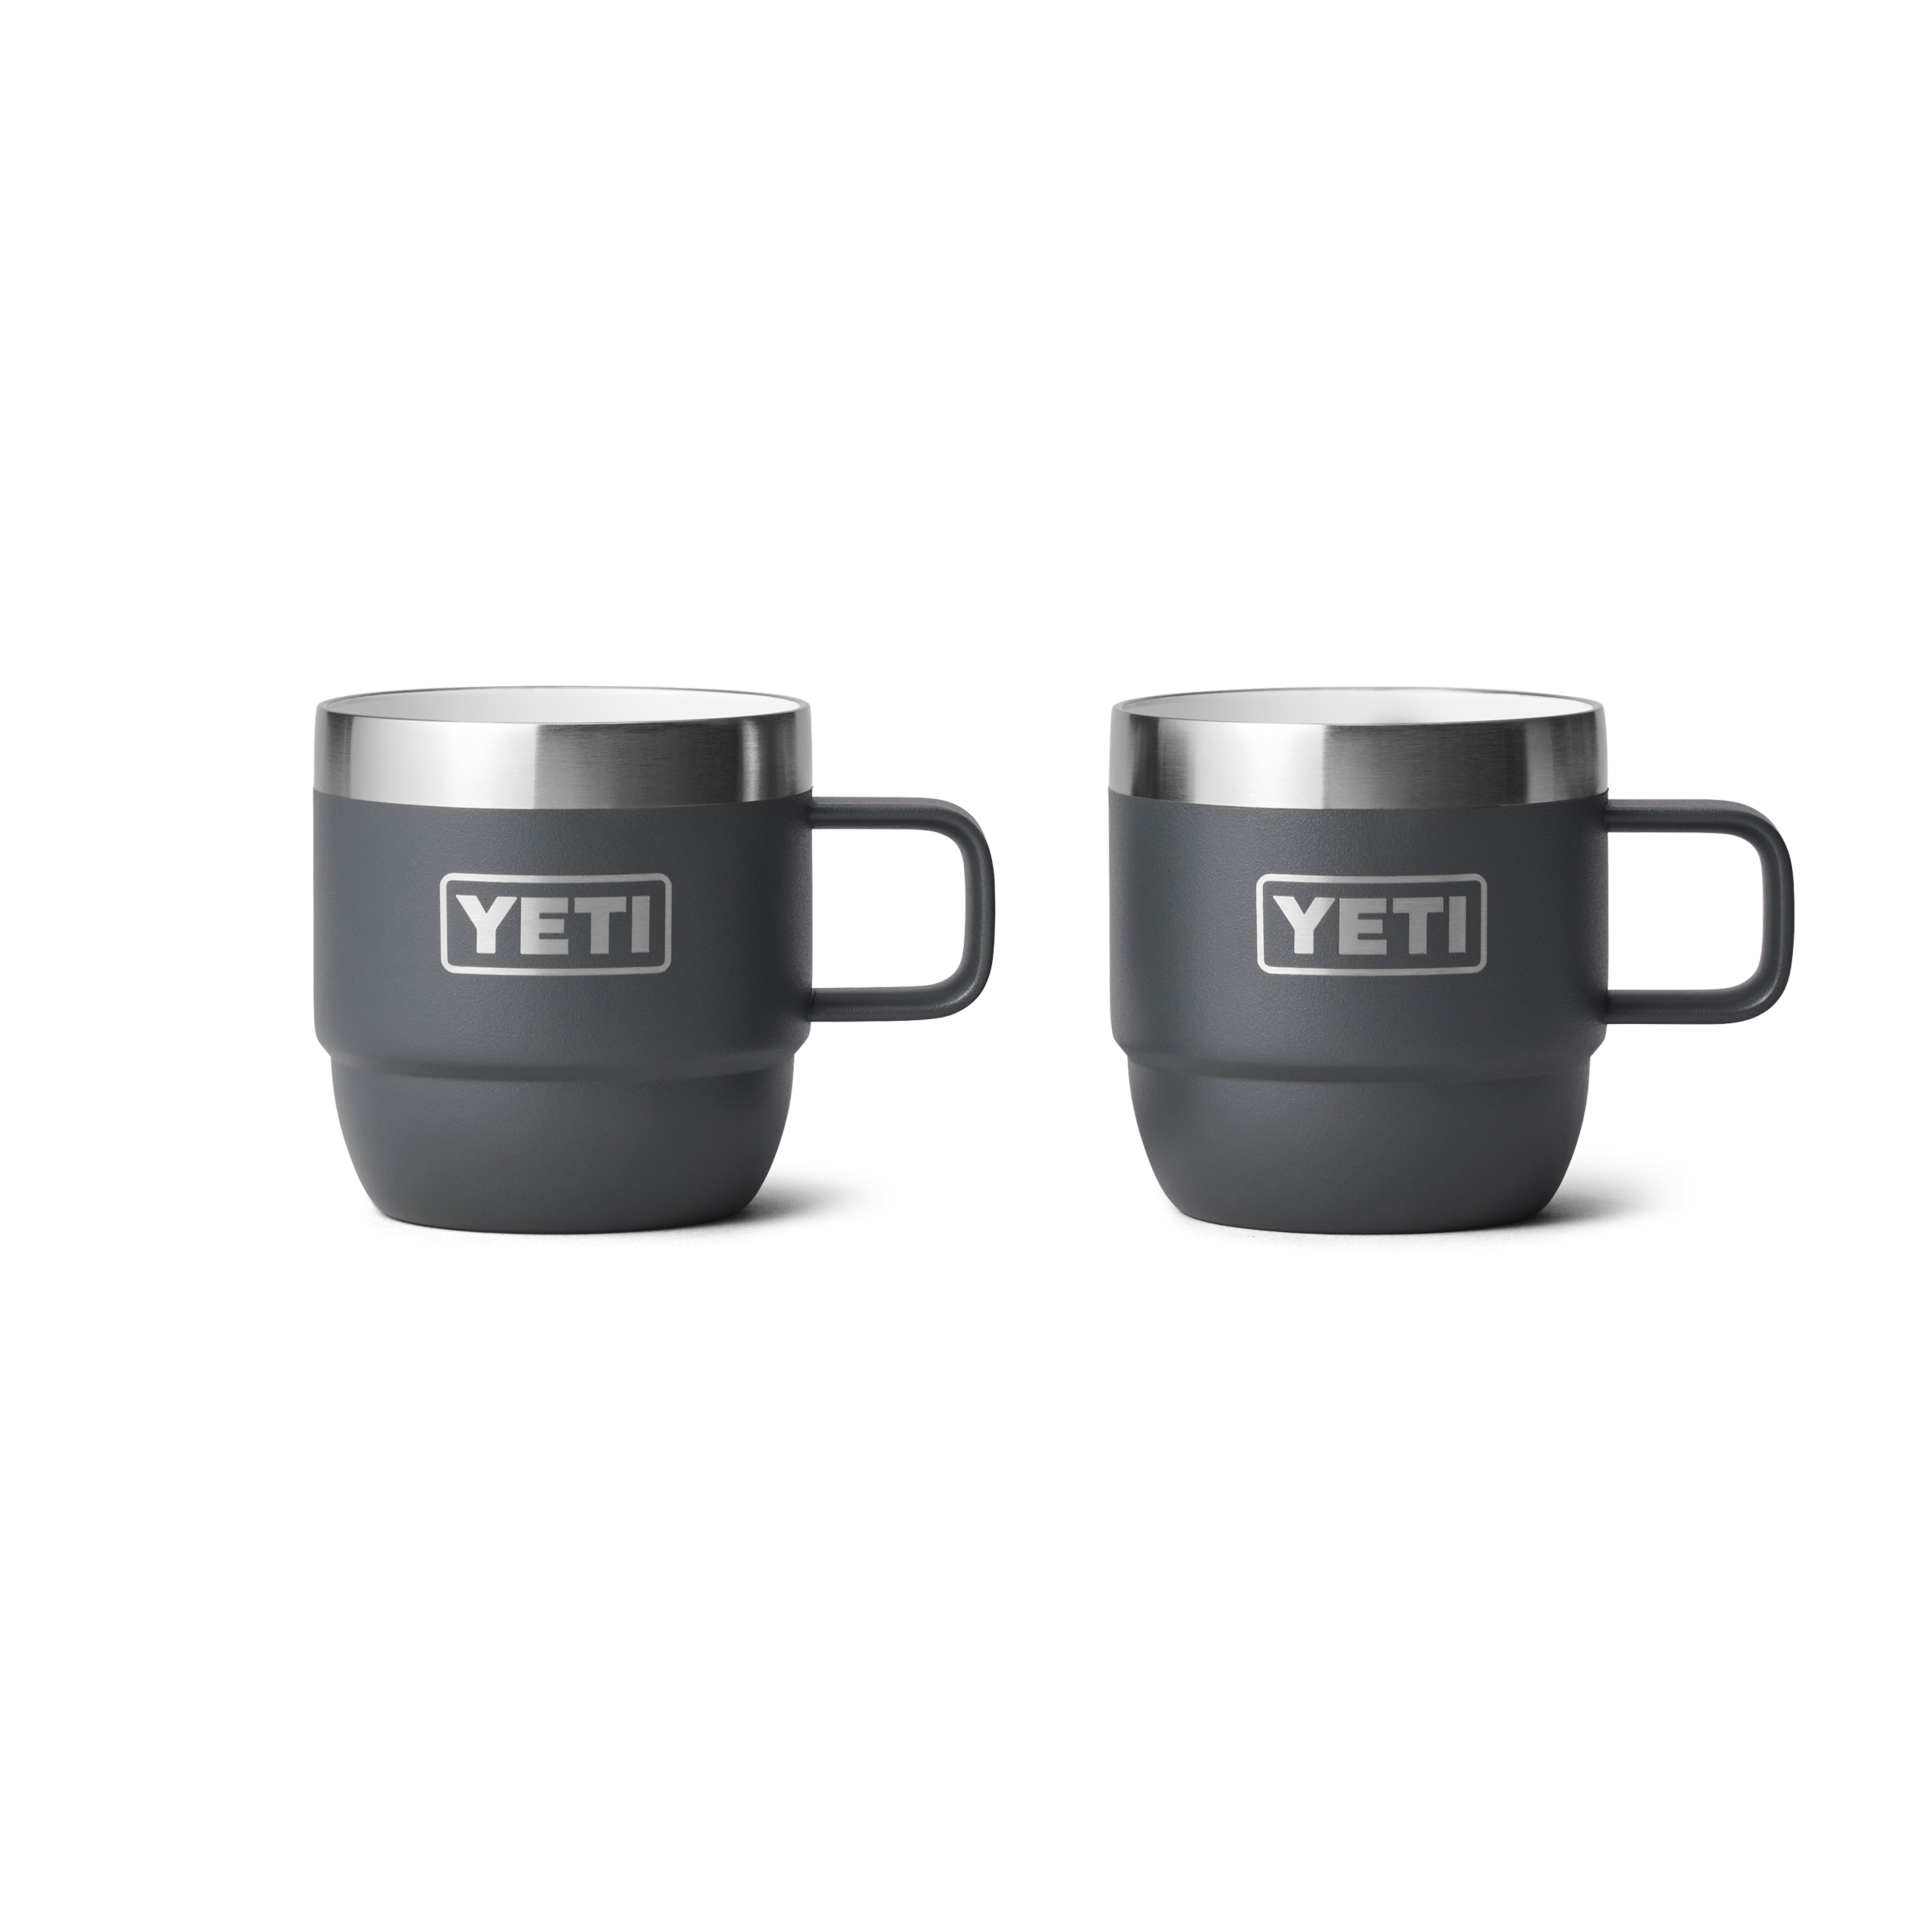 6 oz. / 177ml Stackable Mugs - Charcoal (2 pack)